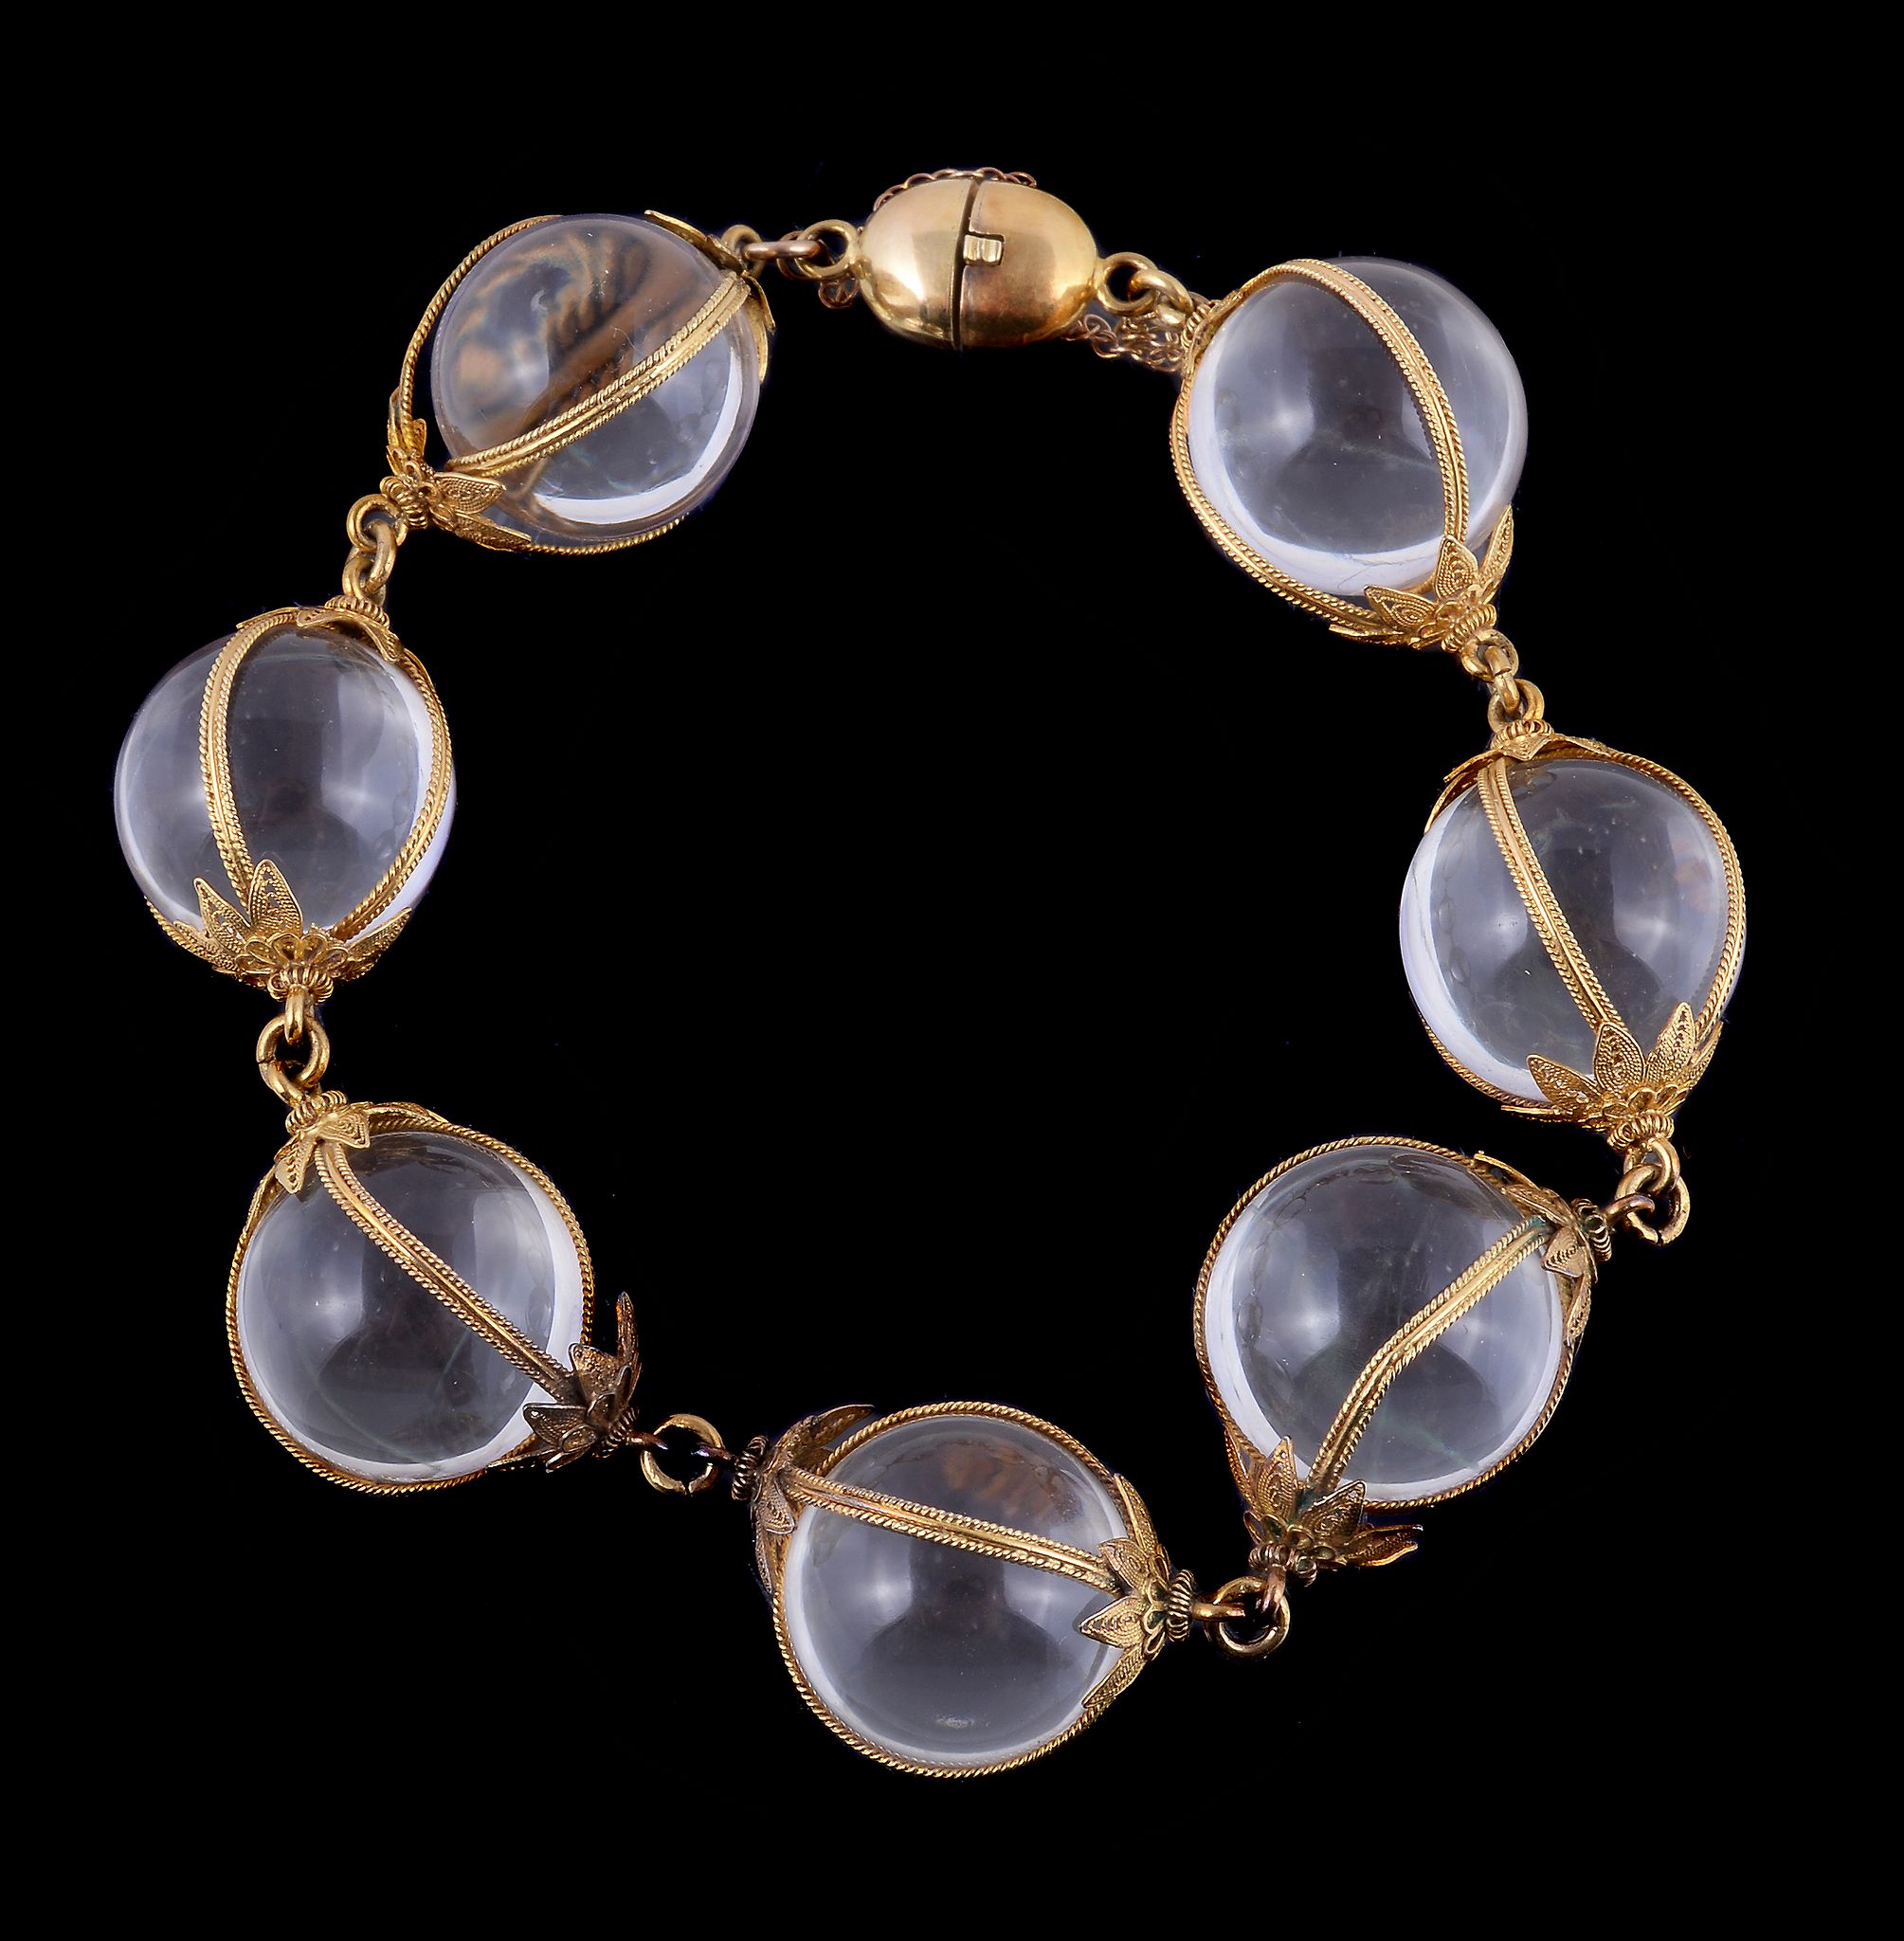 A 19th century adapted rock crystal bracelet, the polished rock crystal spheres encased in filigree